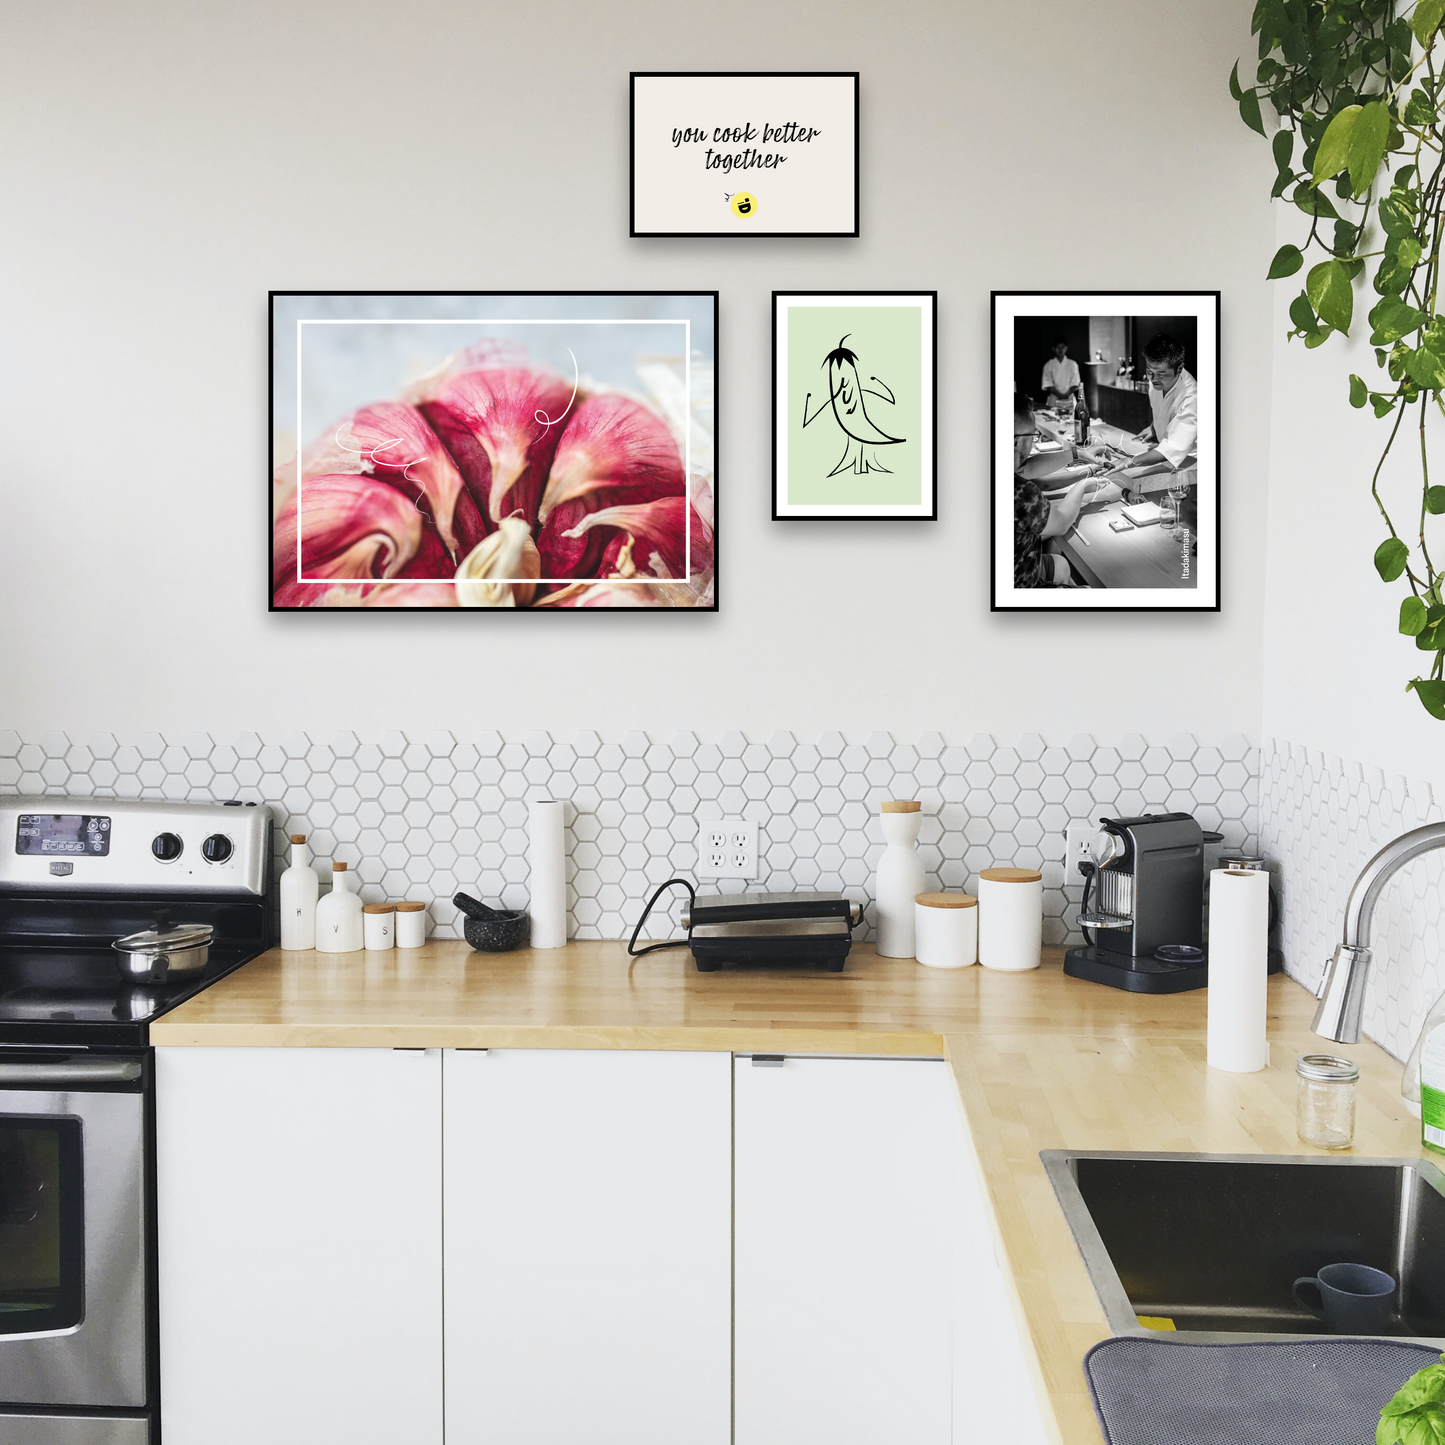 Foodie Feature Wall